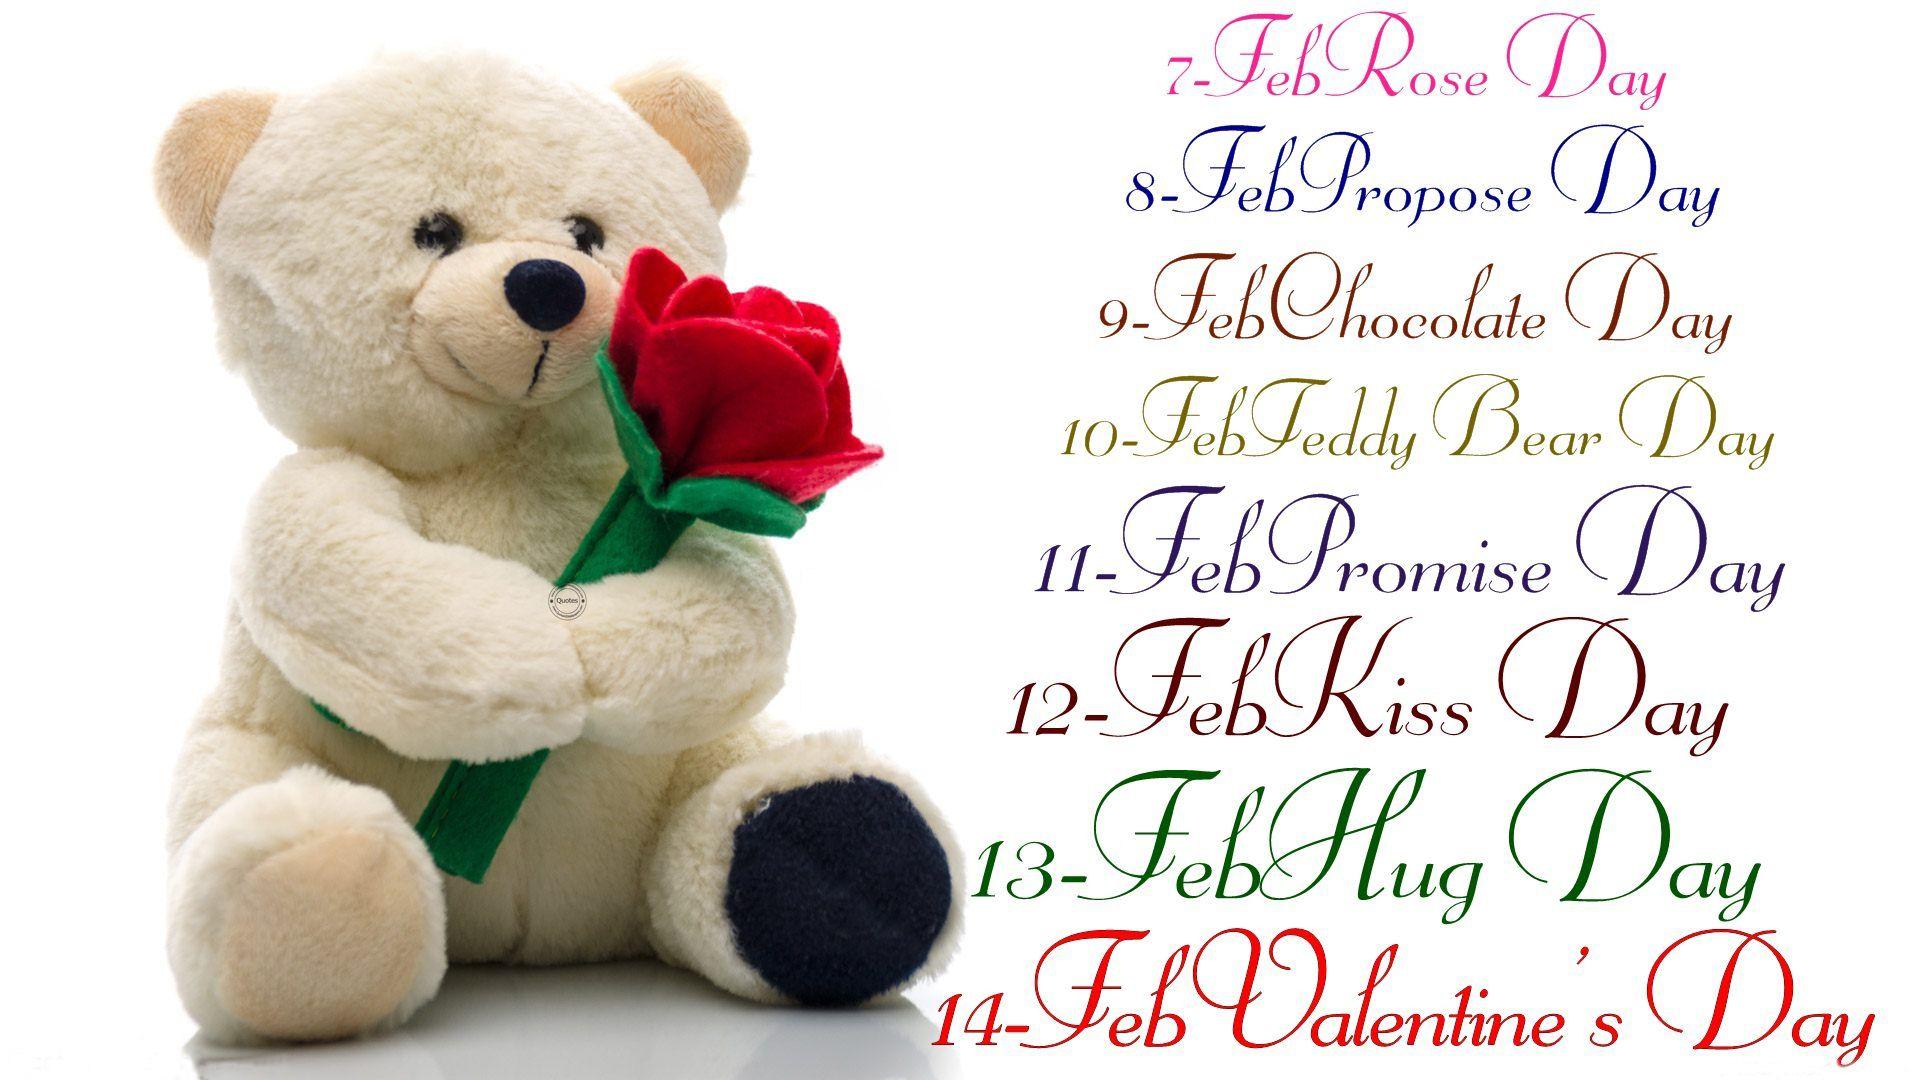 Teddy Day Wallpapers - Wallpaper Cave